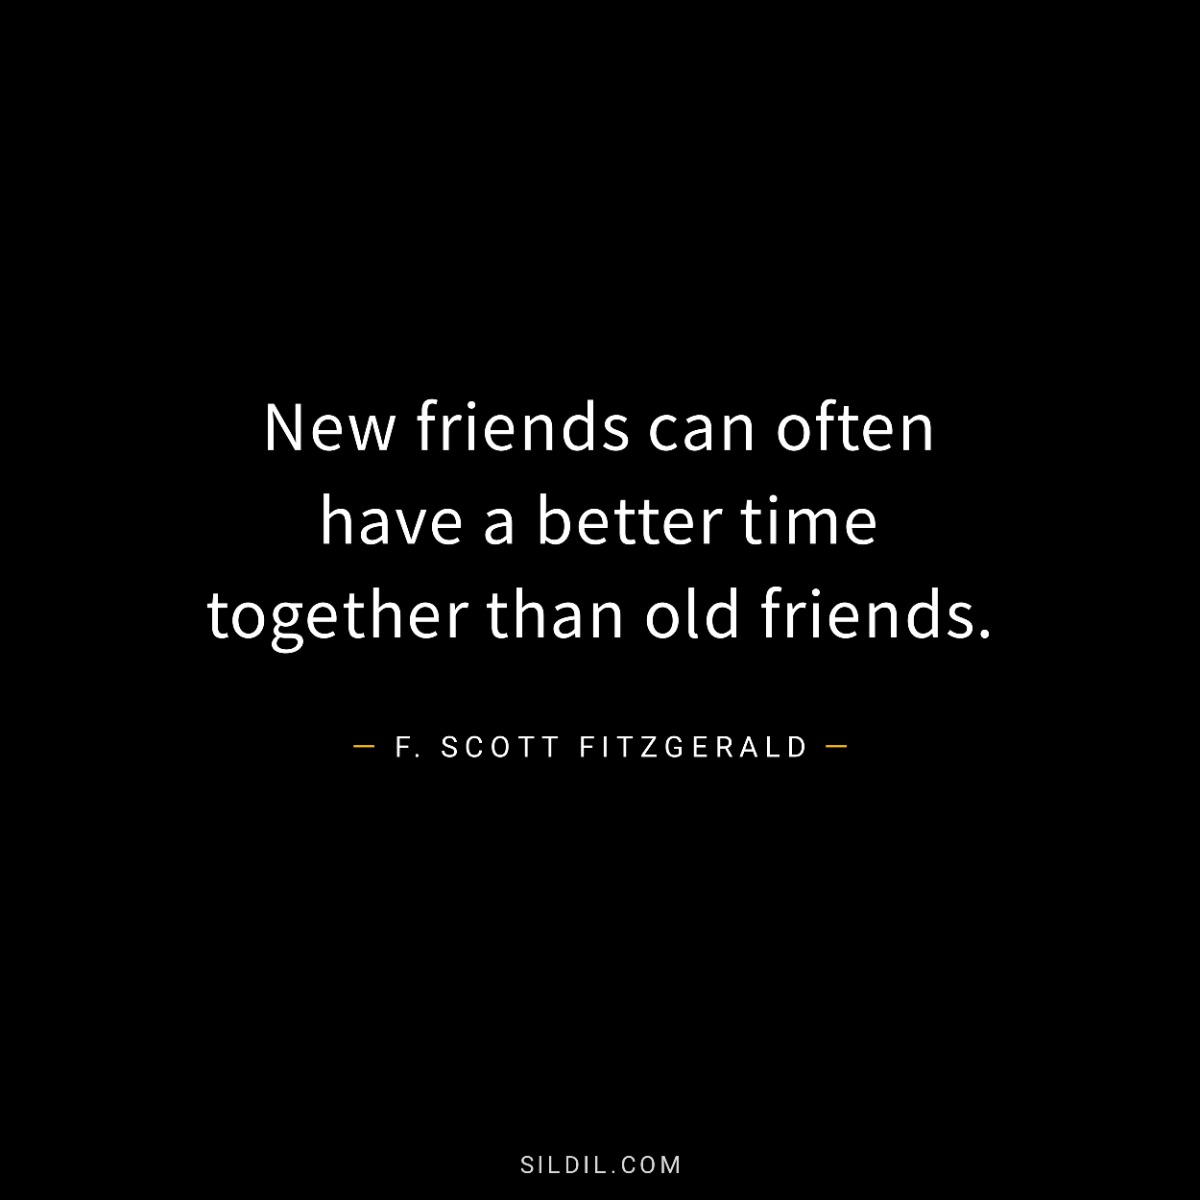 New friends can often have a better time together than old friends.